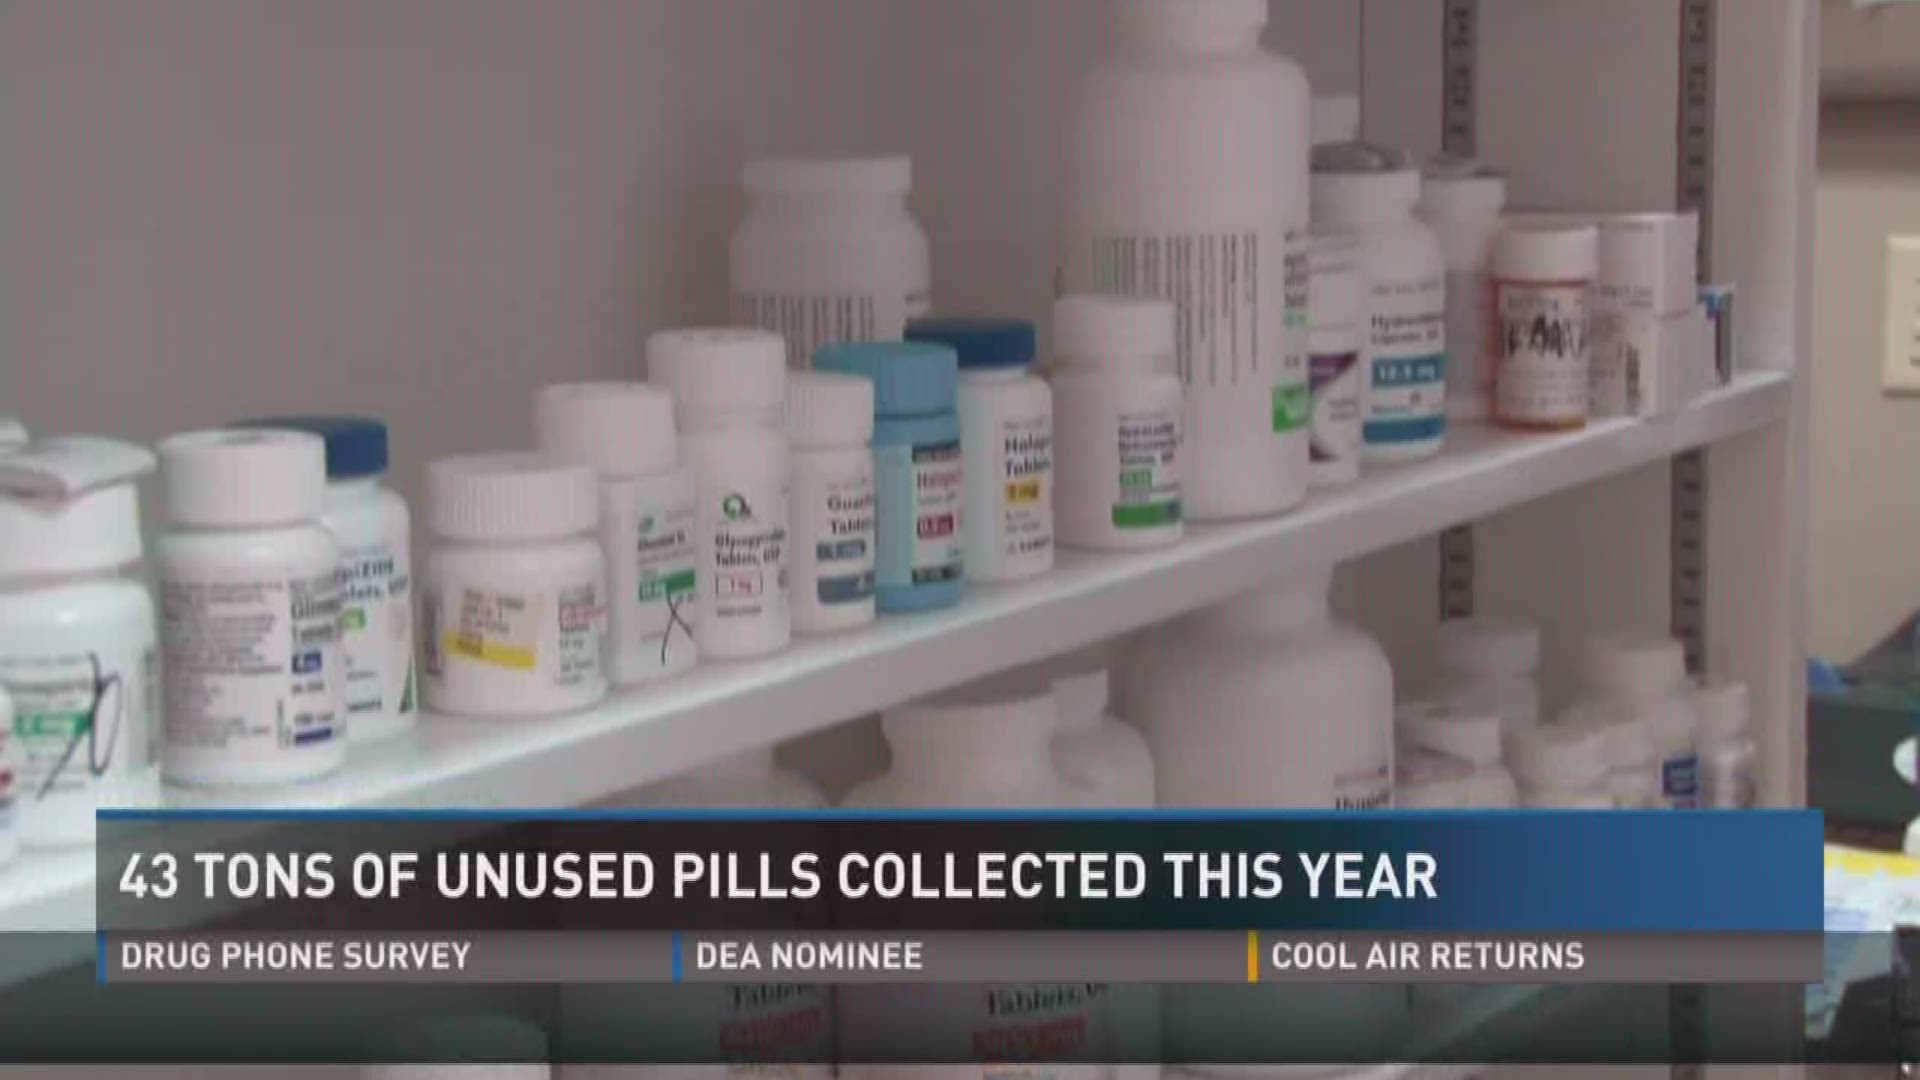 TN drug officials collected 43 tons of unused medicine in just one year.